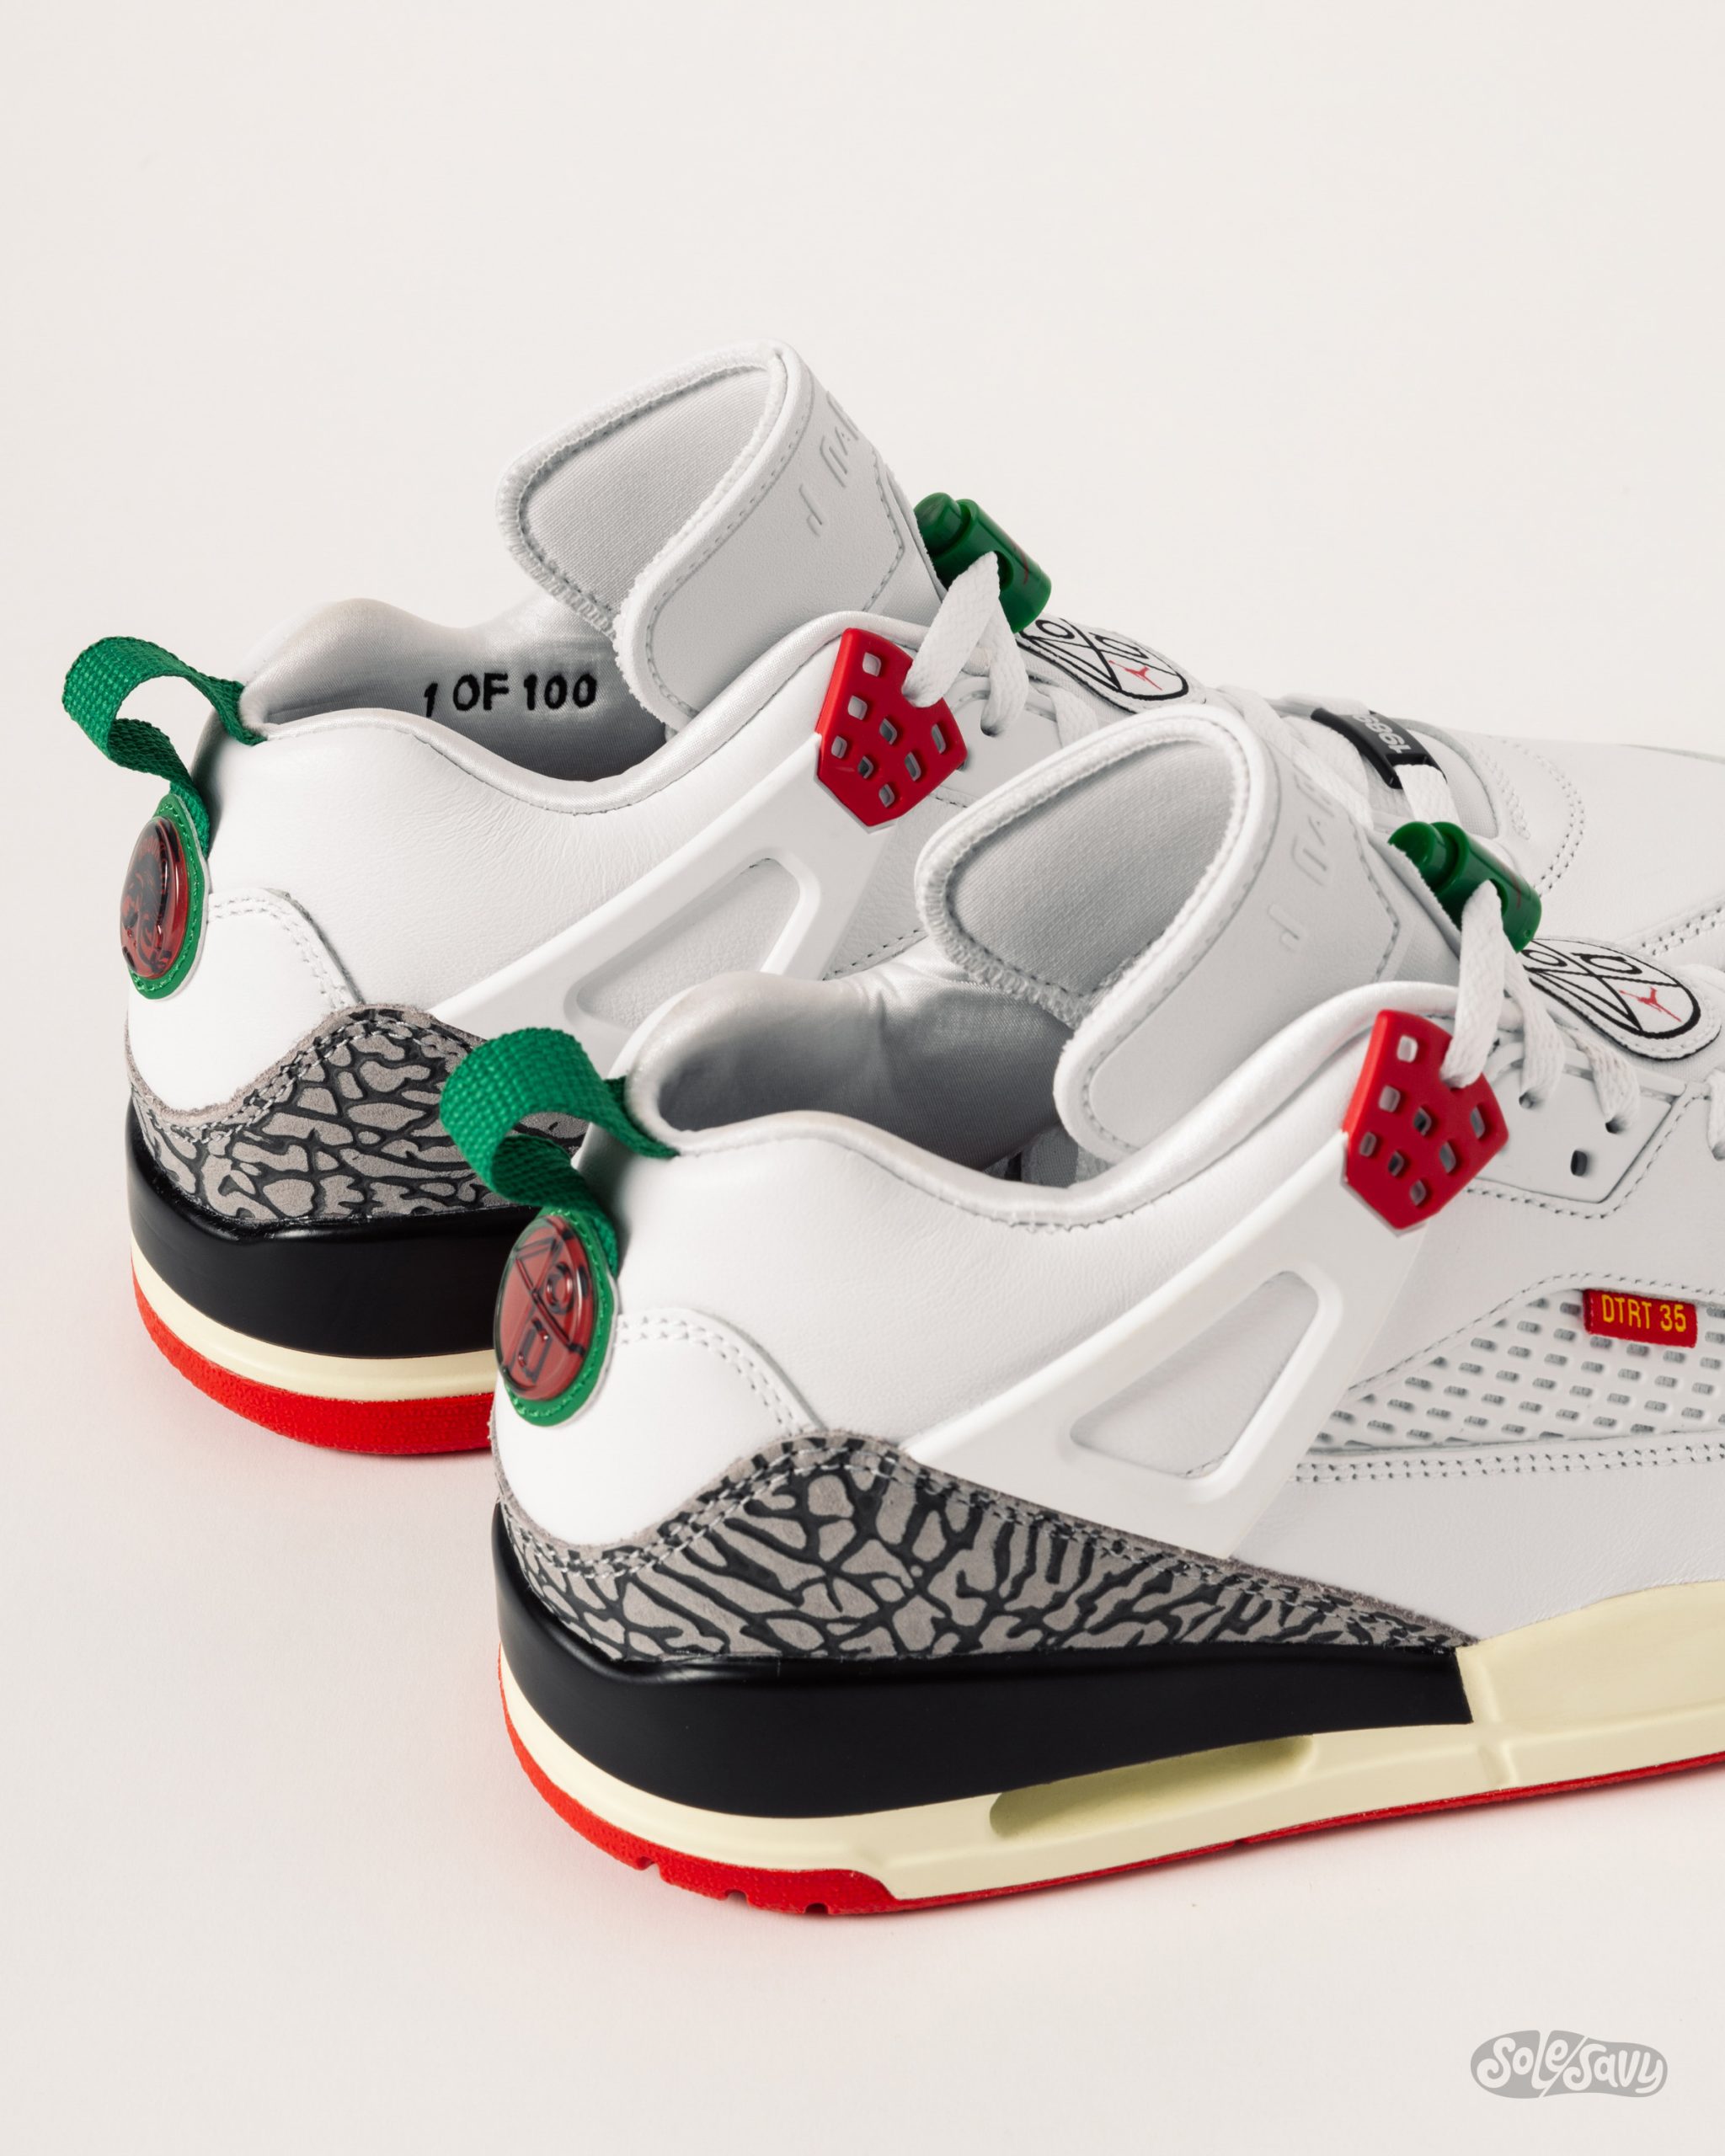 'Do The Right Thing' 35th Anniversary Jordan Spizike Low